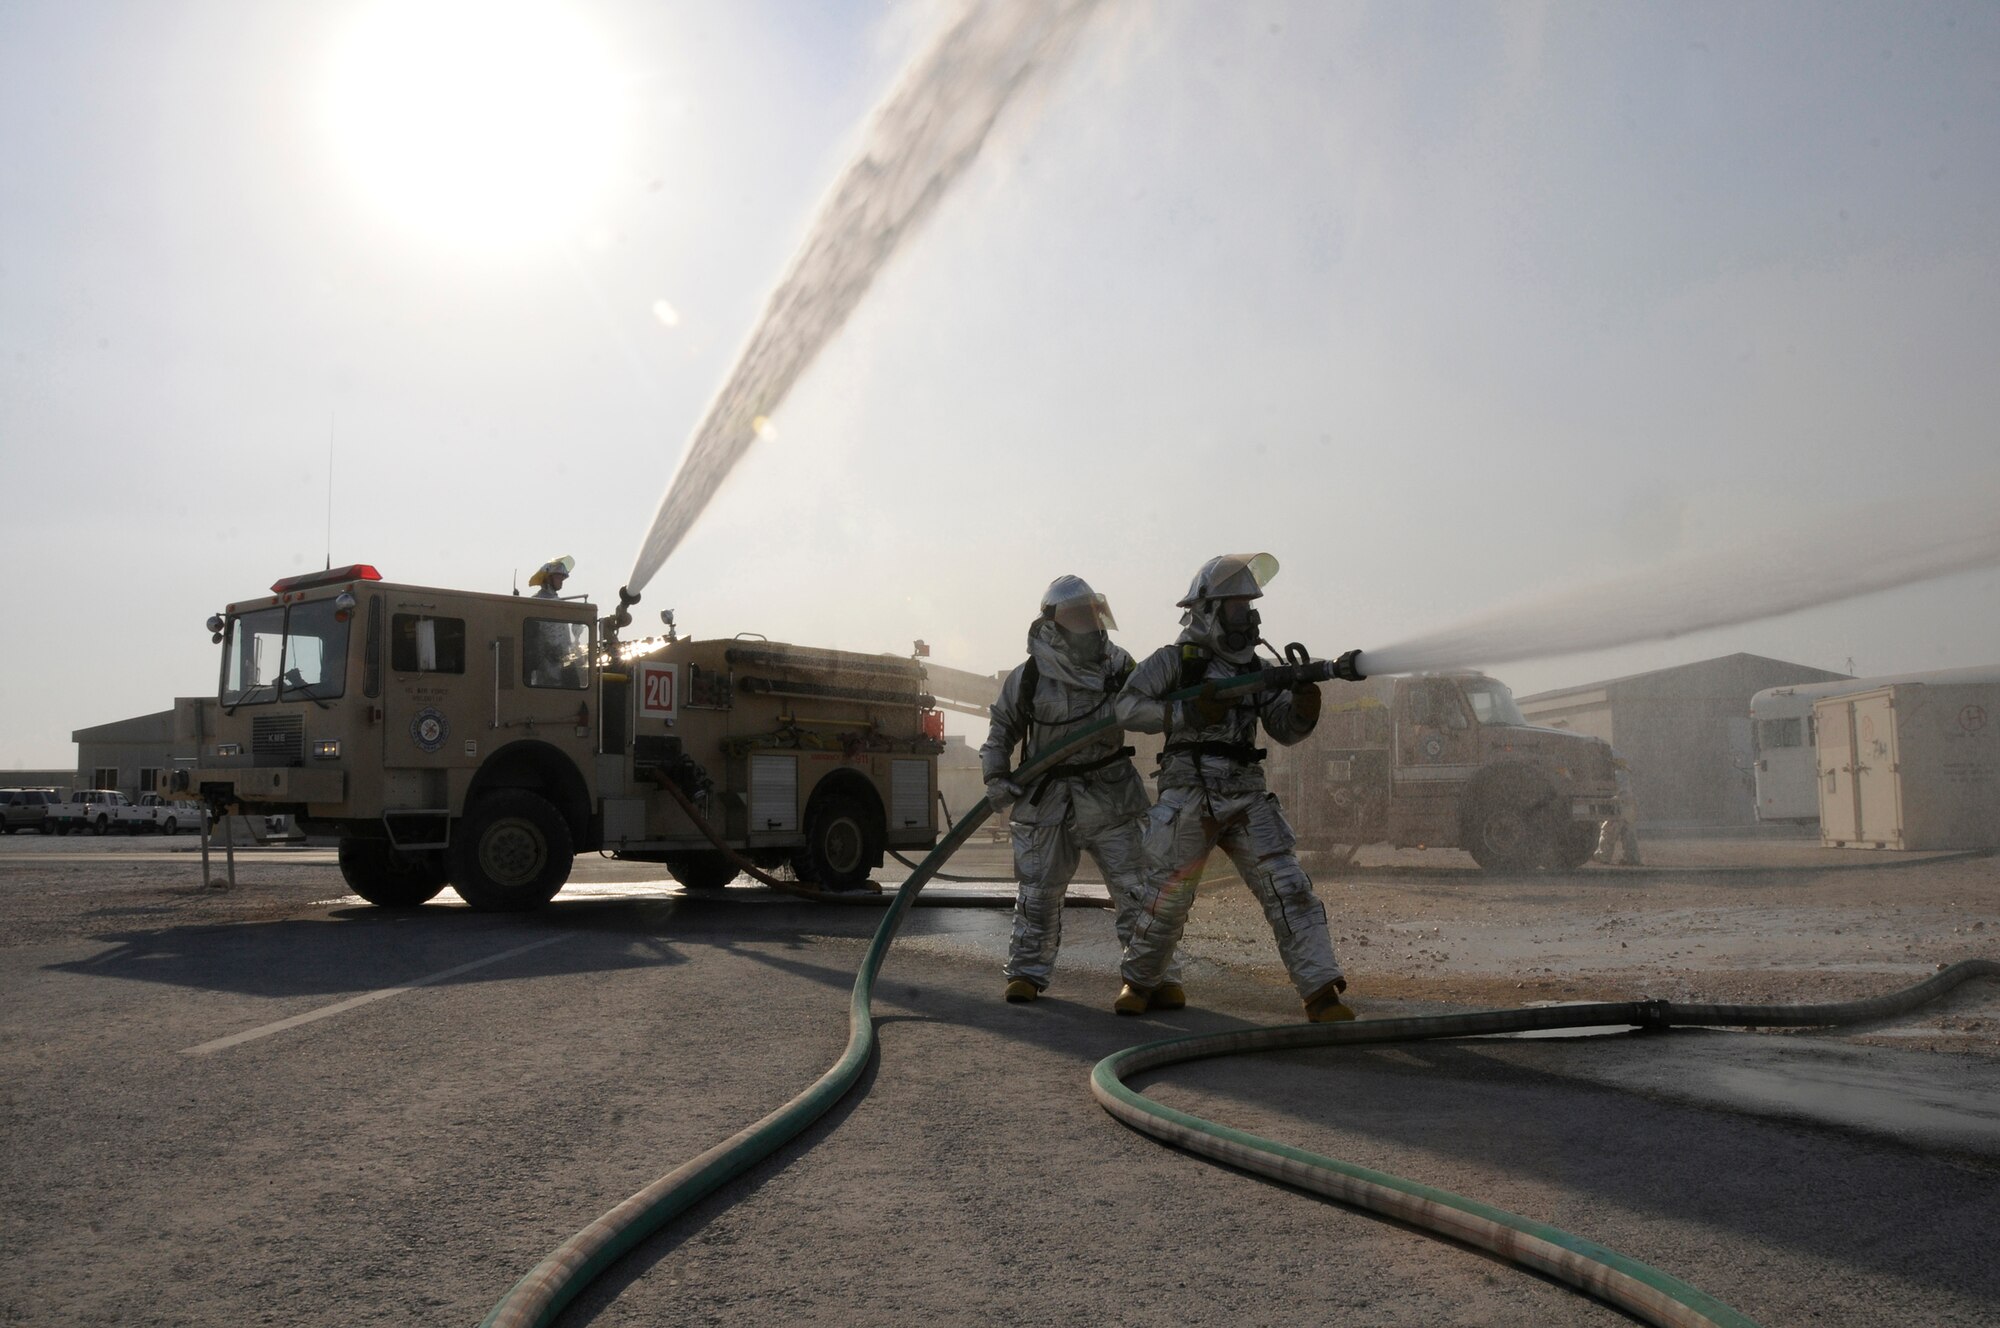 Senior Airman Nikolaus Sonksen, firefighter driver/operator, sprays a truck-mounted hose turret while Tech. Sgt. Peter W. Peterson, firefighter crew chief, and Airman 1st Class Zachary Kuiper, firefighter lineman, spray their hose in normal defensive attack as part of crew proficiency training Nov. 20, at an undisclosed air base in Southwest Asia. All are assigned to the 379th Expeditionary Civil Engineer Squadron. Daily crew proficiency training ensures these ECES members are prepared for any situation. Airman Sonksen, a native of Springville, Calif., is deployed from Travis Air Force Base, Calif. Sergeant Peterson, a native of Minneapolis, Minn., is deployed from Whiteman AFB, Mo.  Airman Kuiper, a native of Orlando, Fla., is deployed from Tyndall AFB Fla. All are deployed in support of Operations Iraqi and Enduring Freedom and Joint Task Force-Horn of Africa. (U.S. Air Force photo by Staff Sgt. Darnell T. Cannady/Released)